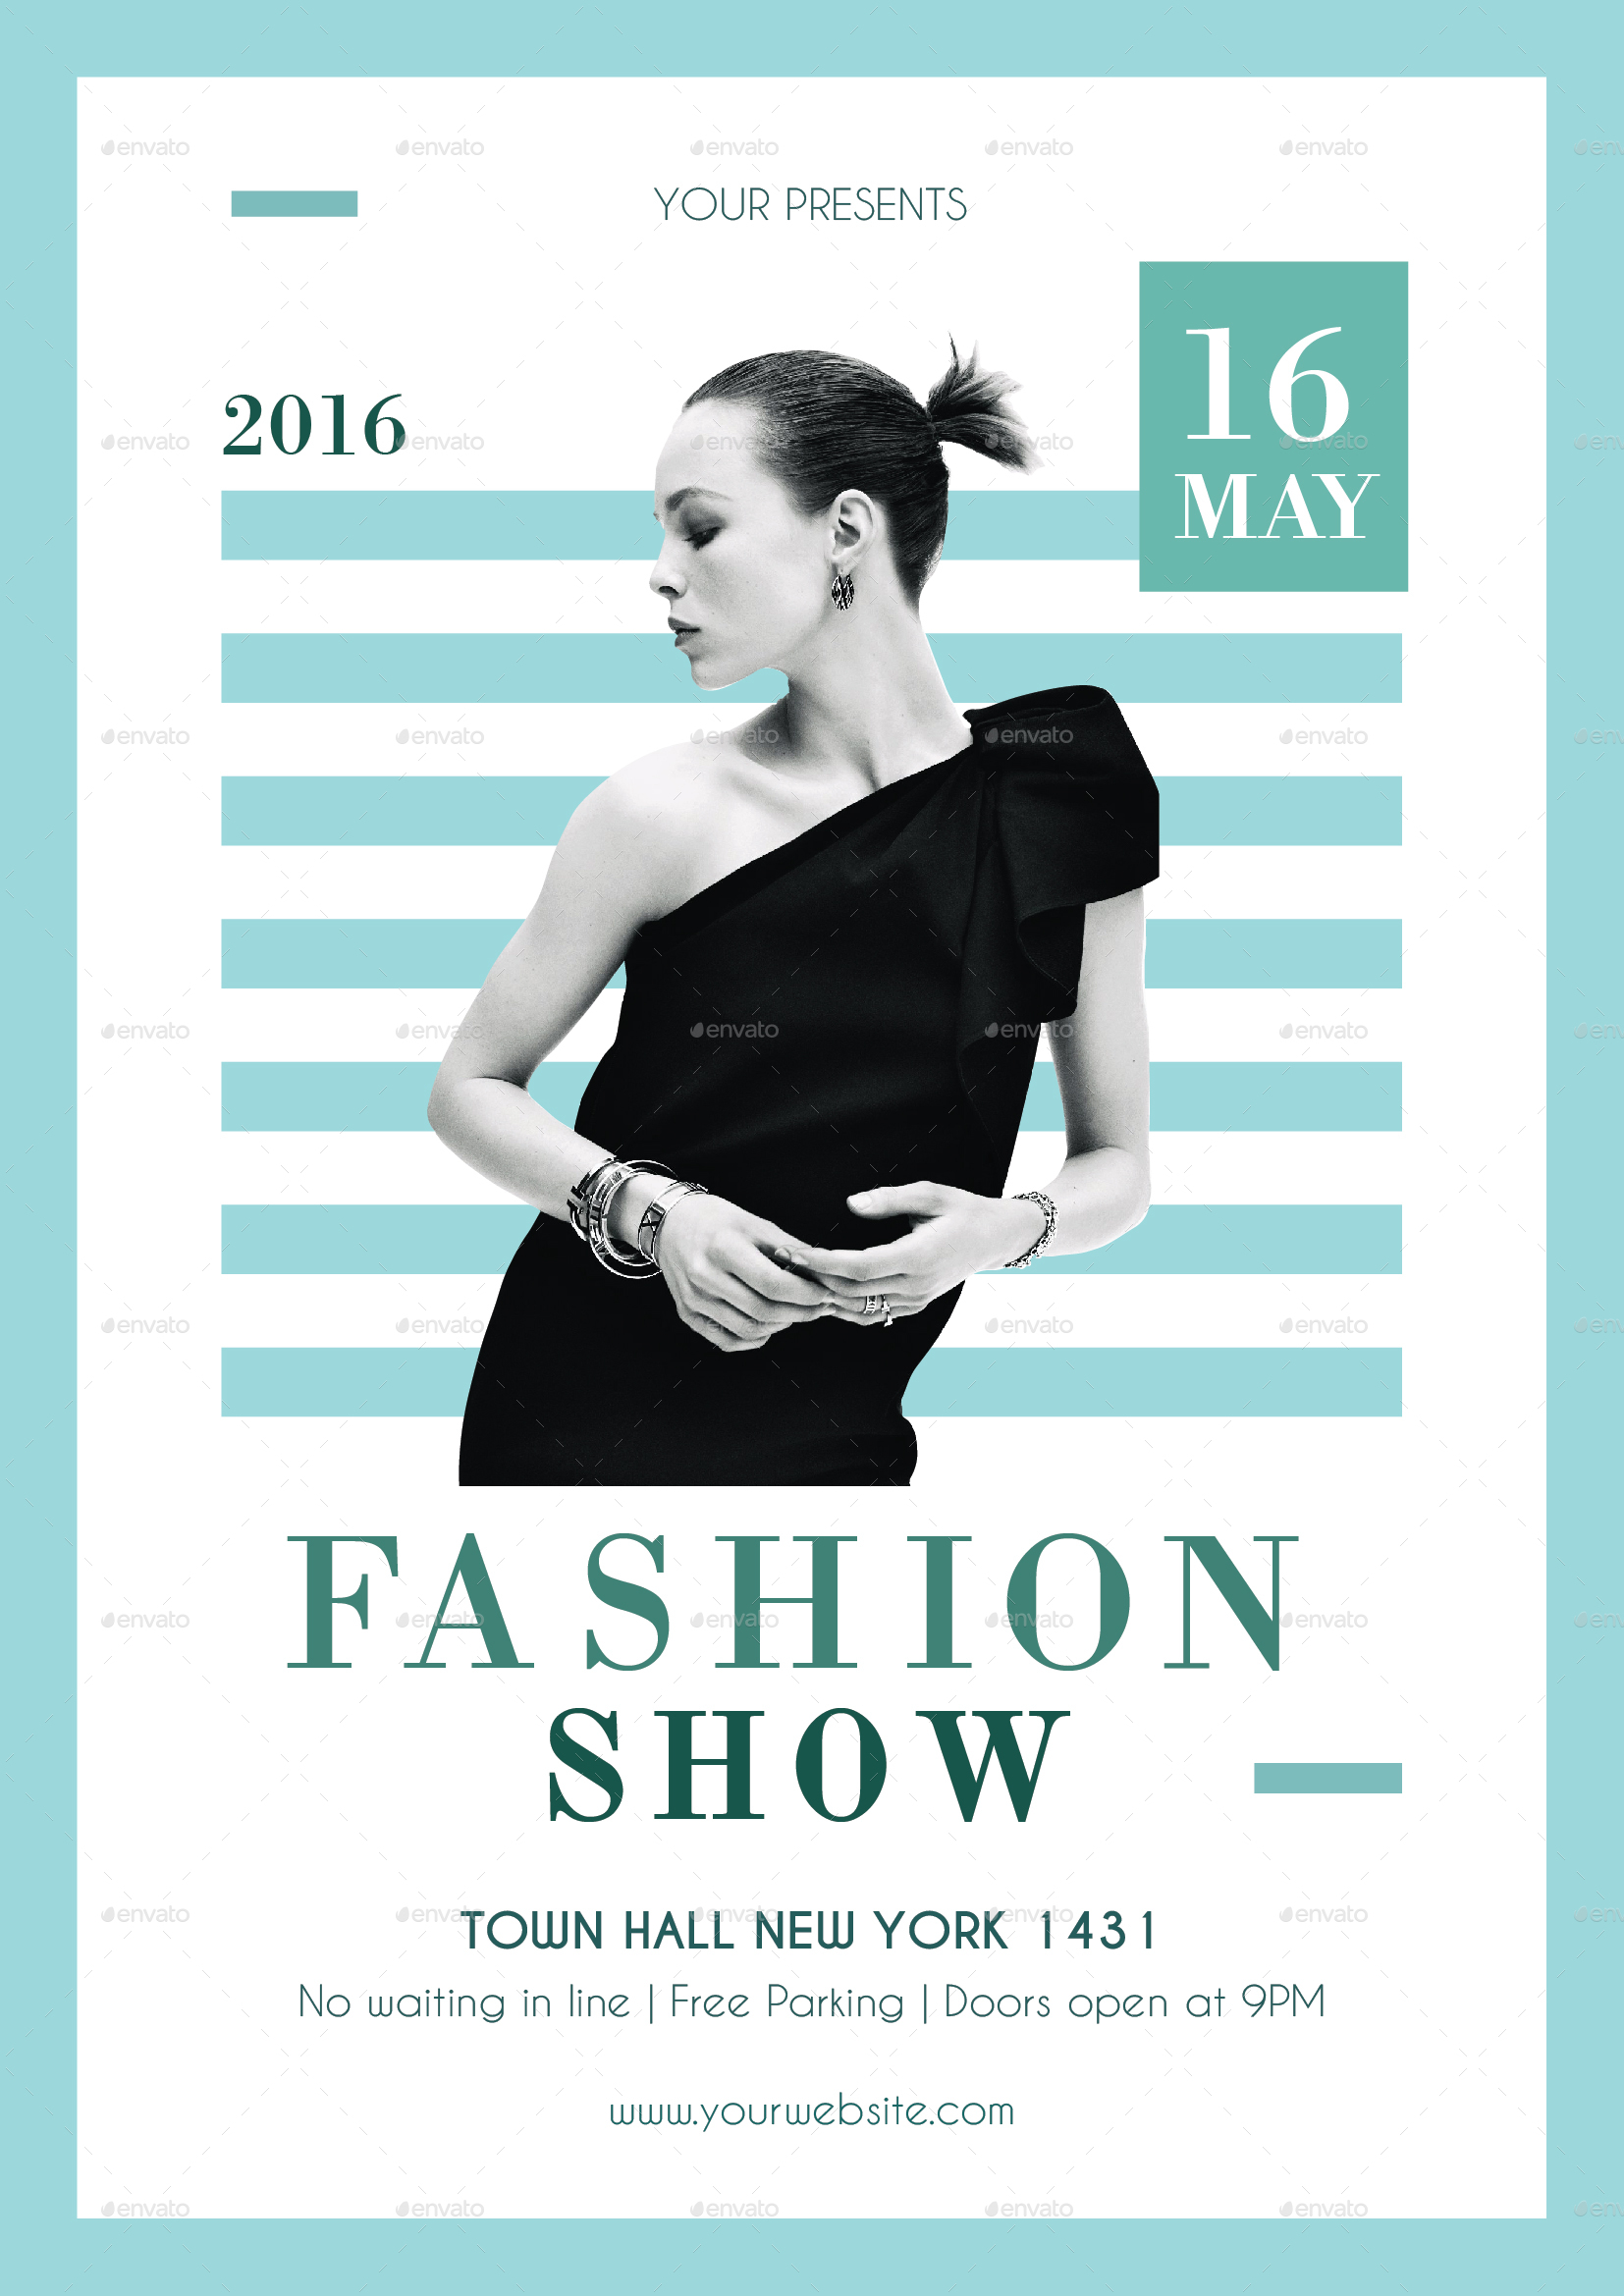 Fashion Show Flyer by infinite78910 | GraphicRiver